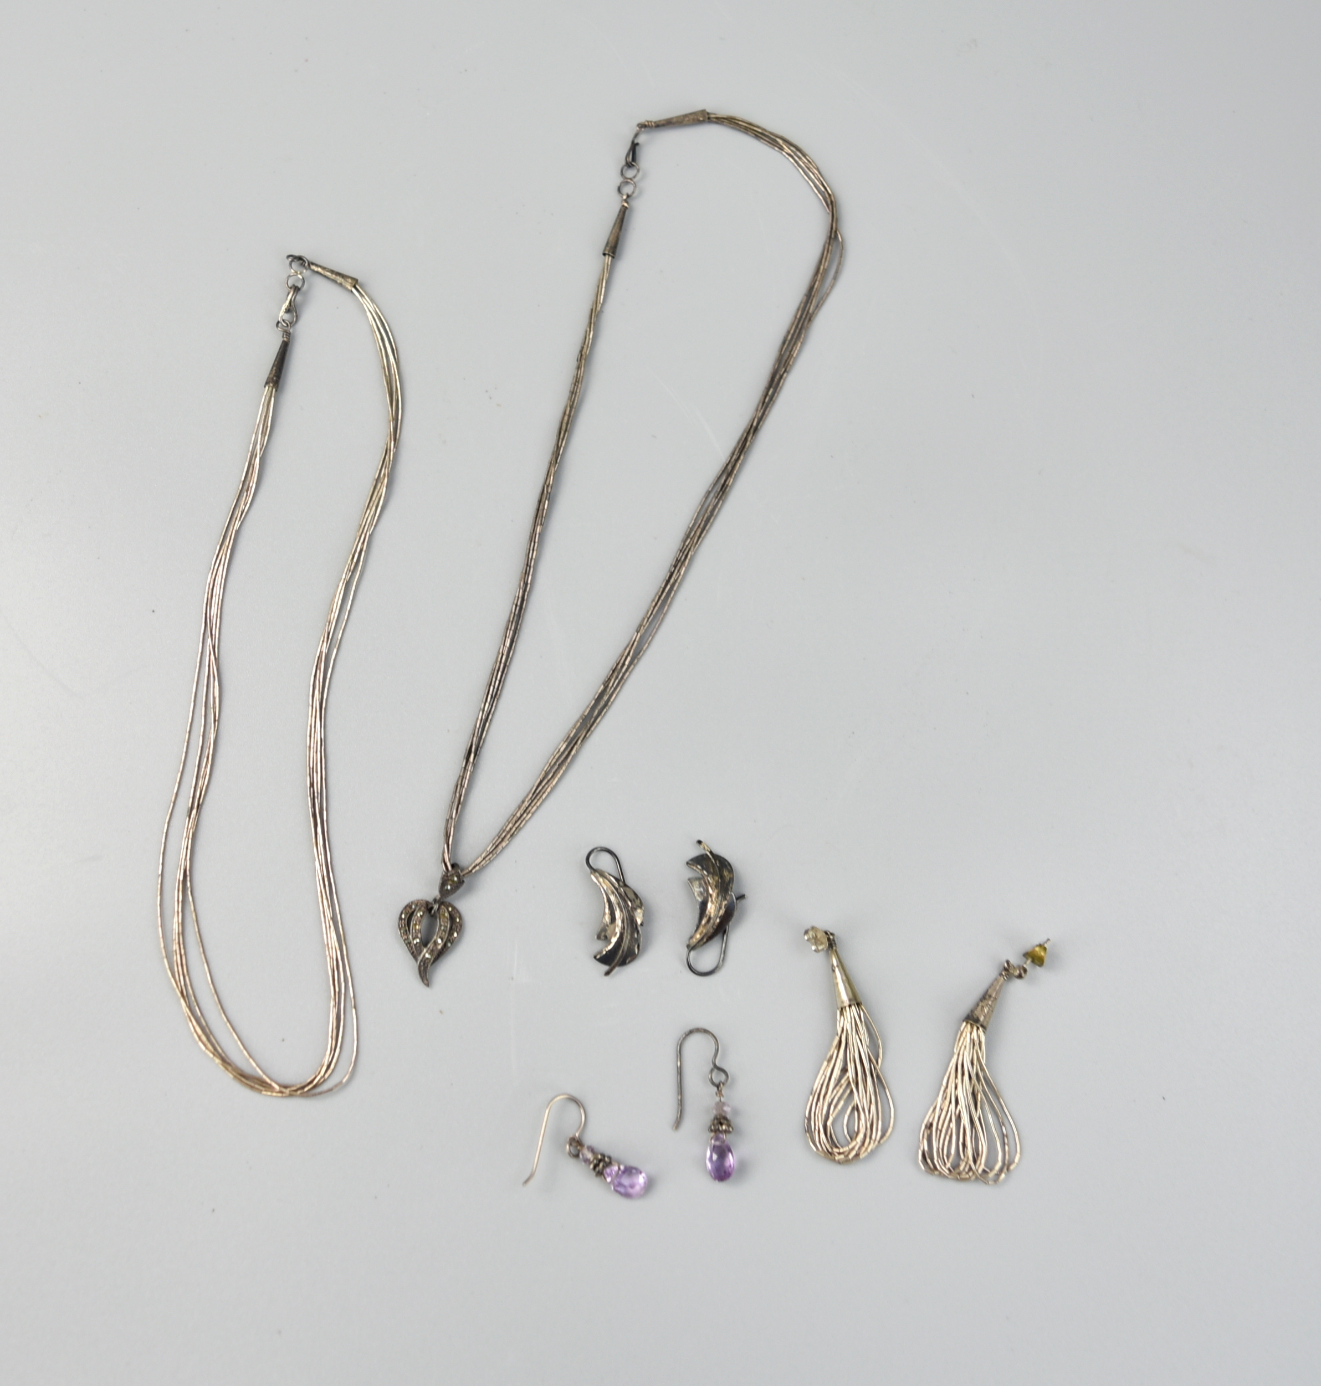 2 SILVER NECKLACES,3 PAIRS OF EARRINGS